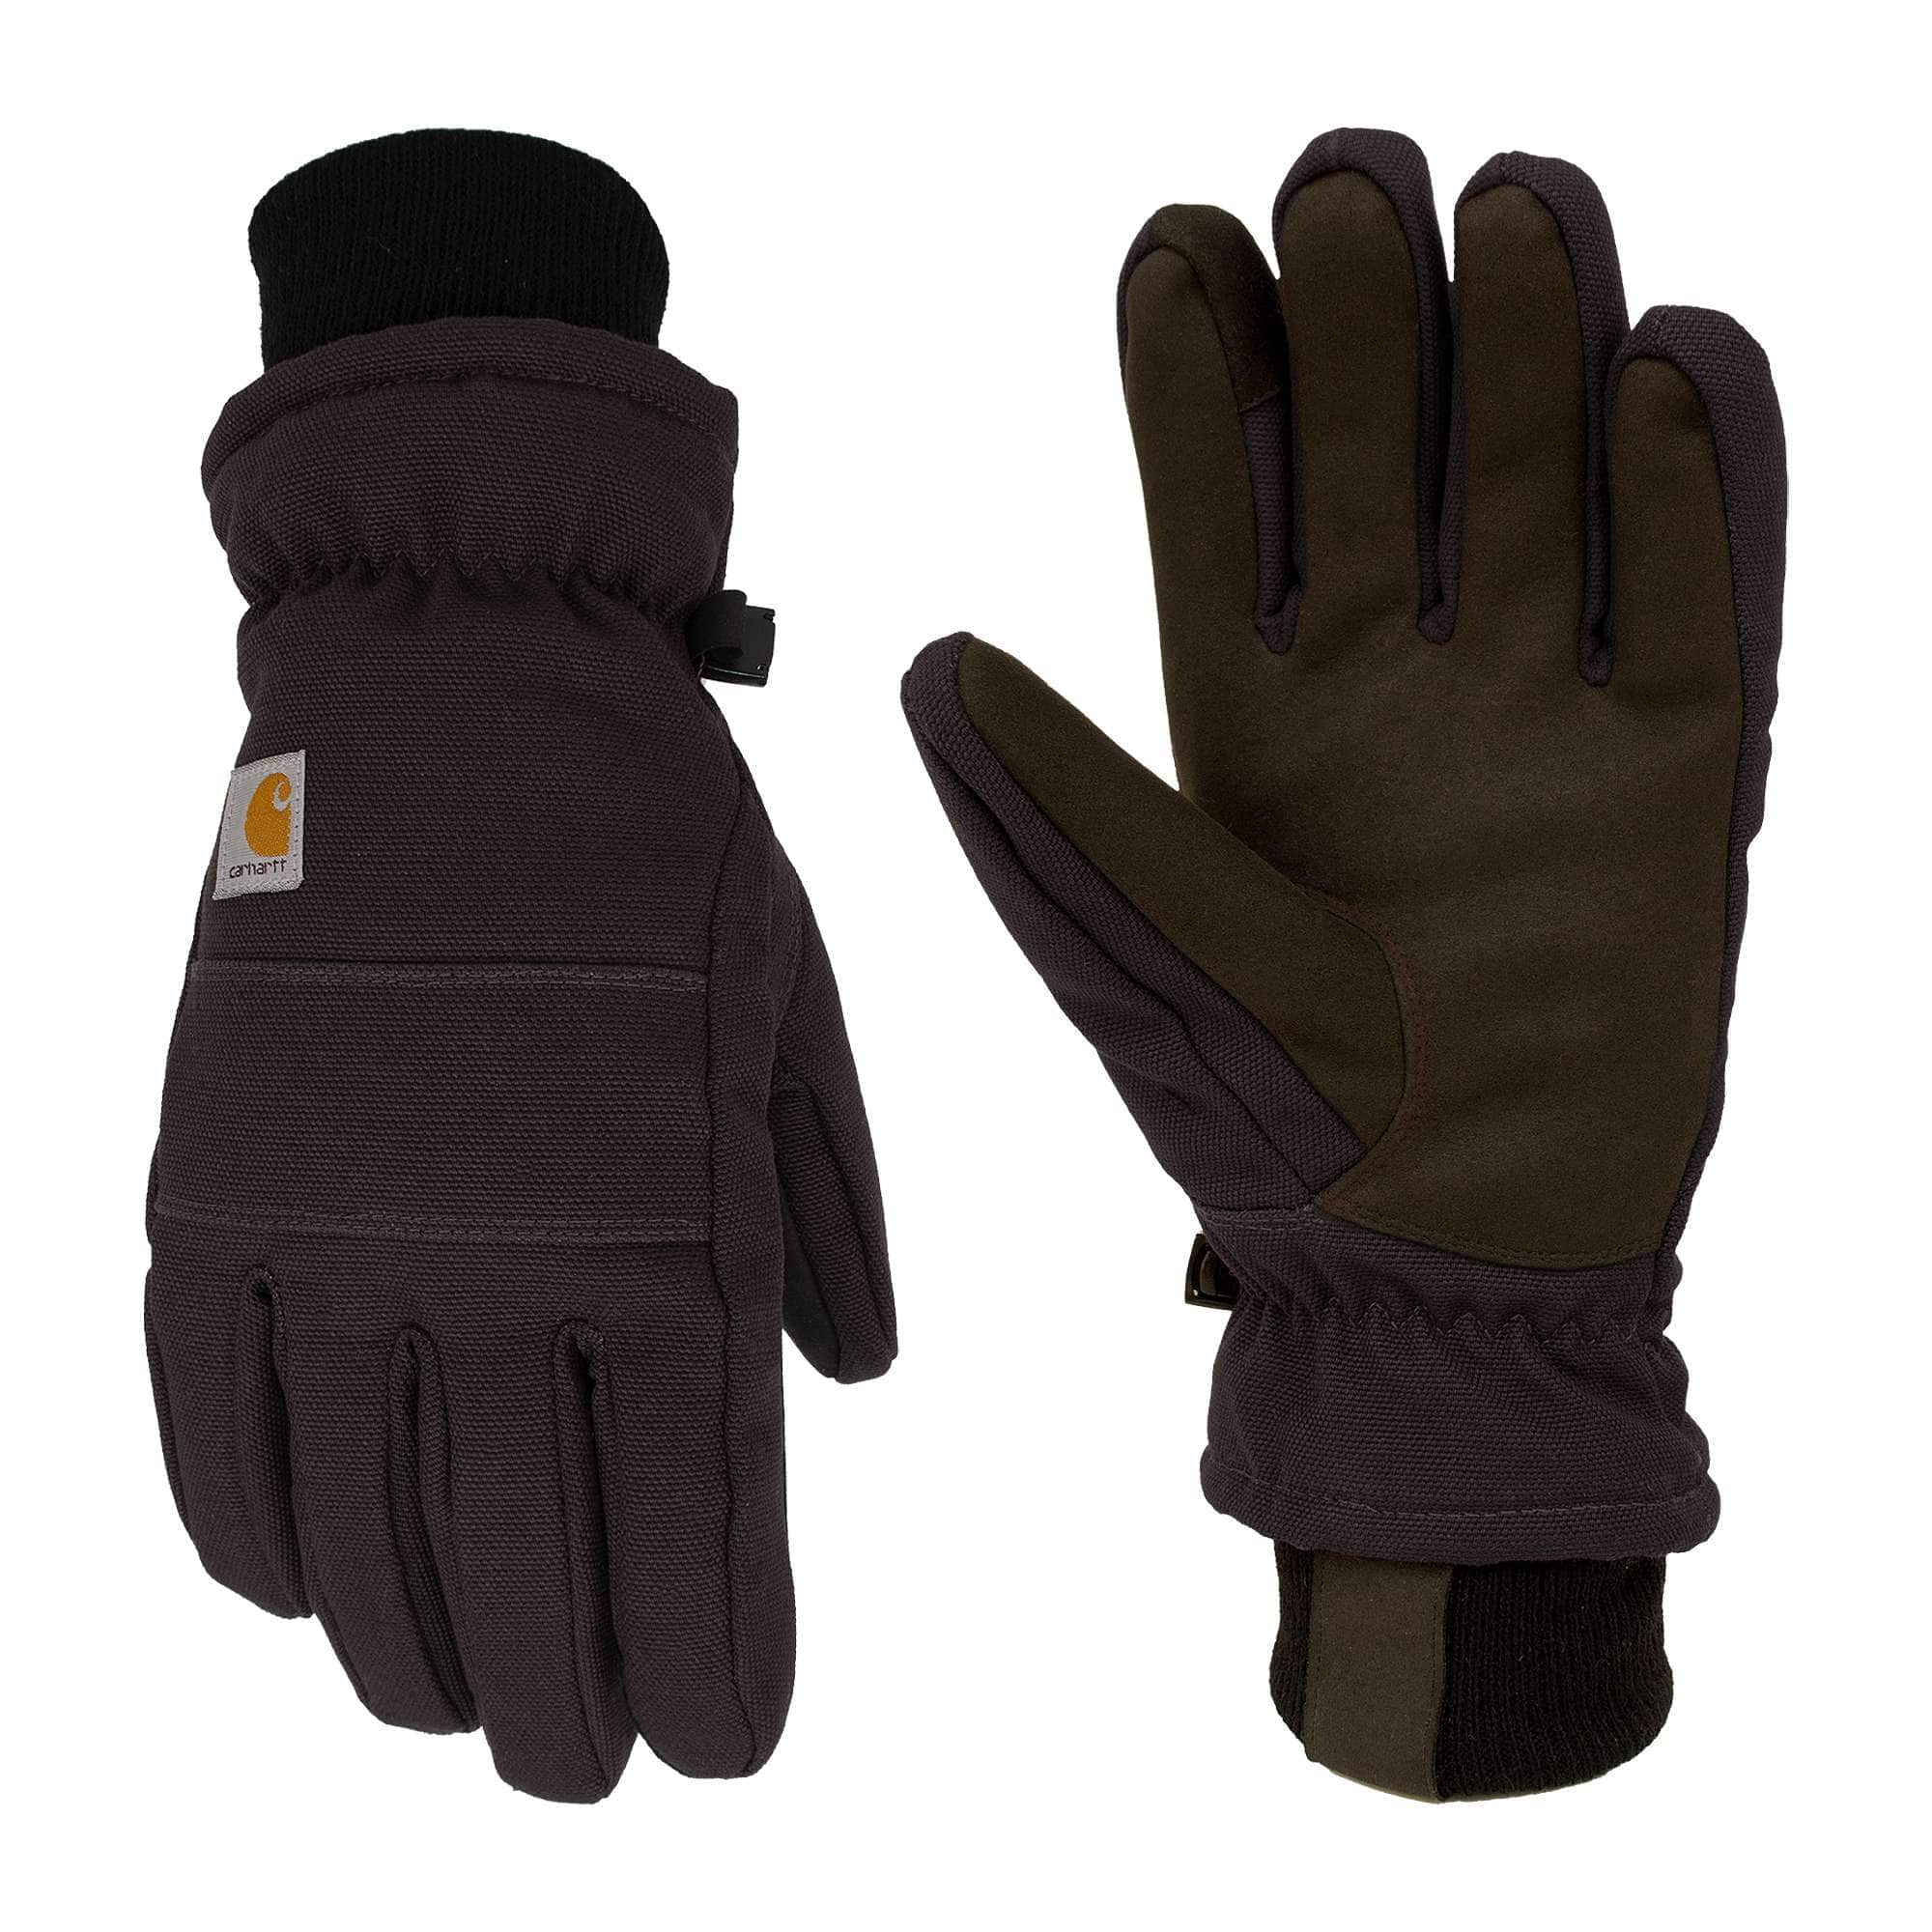 Women's Insulated Duck/Synthetic Leather Knit Cuff Glove